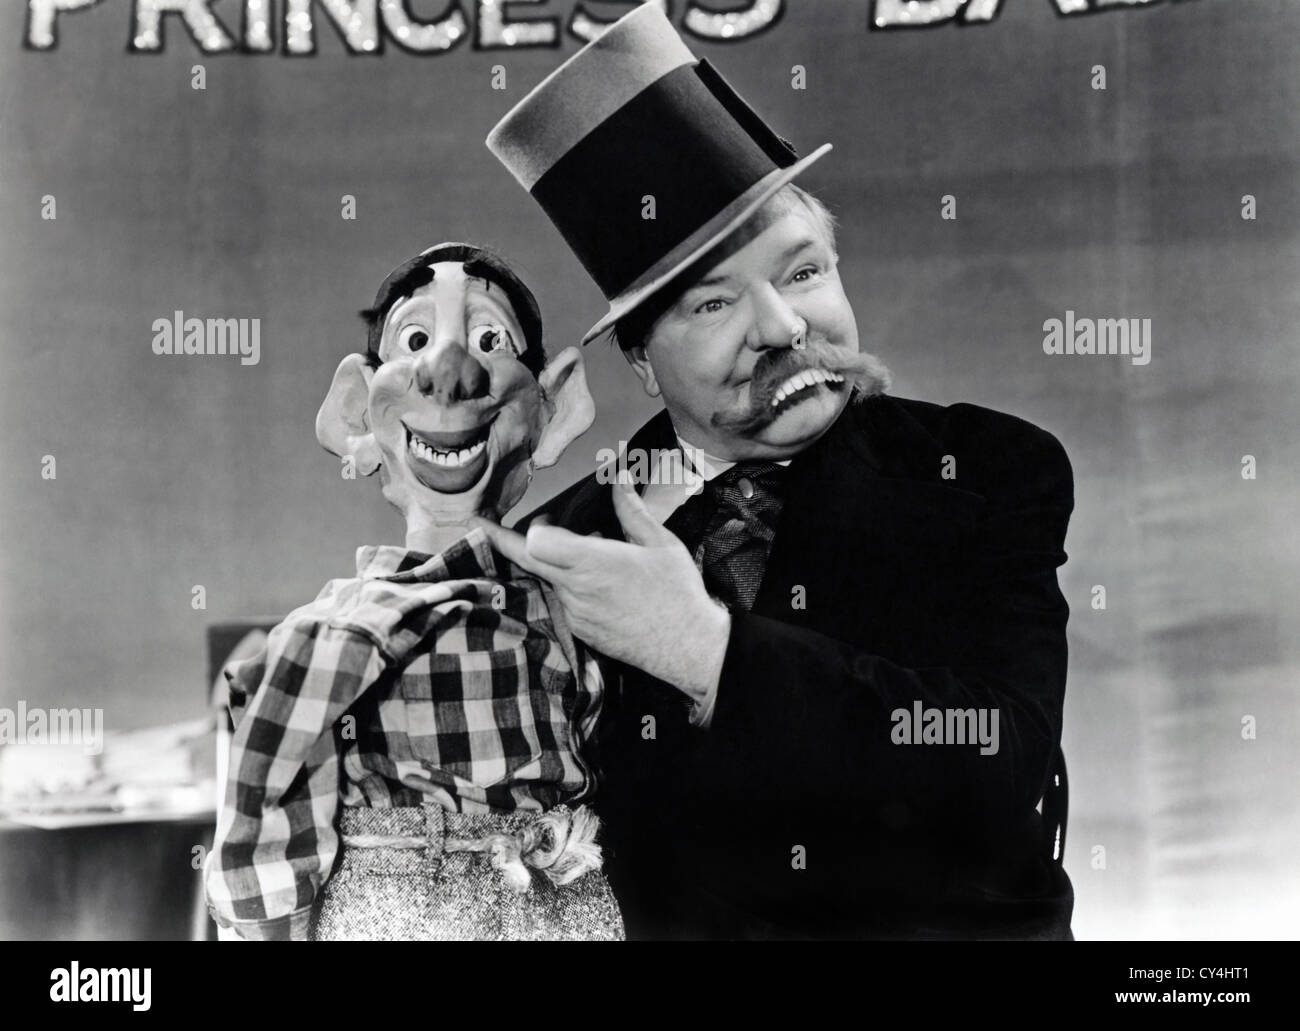 YOU CAN'T CHEAT HONEST MAN (1939) W.C.FIELDS CHARLIE MCCARTHY (PUPPET) GEORGE MARSHALL (DIR) YCC1 004 MOVIESTORE COLLECTION LTD Stock Photo